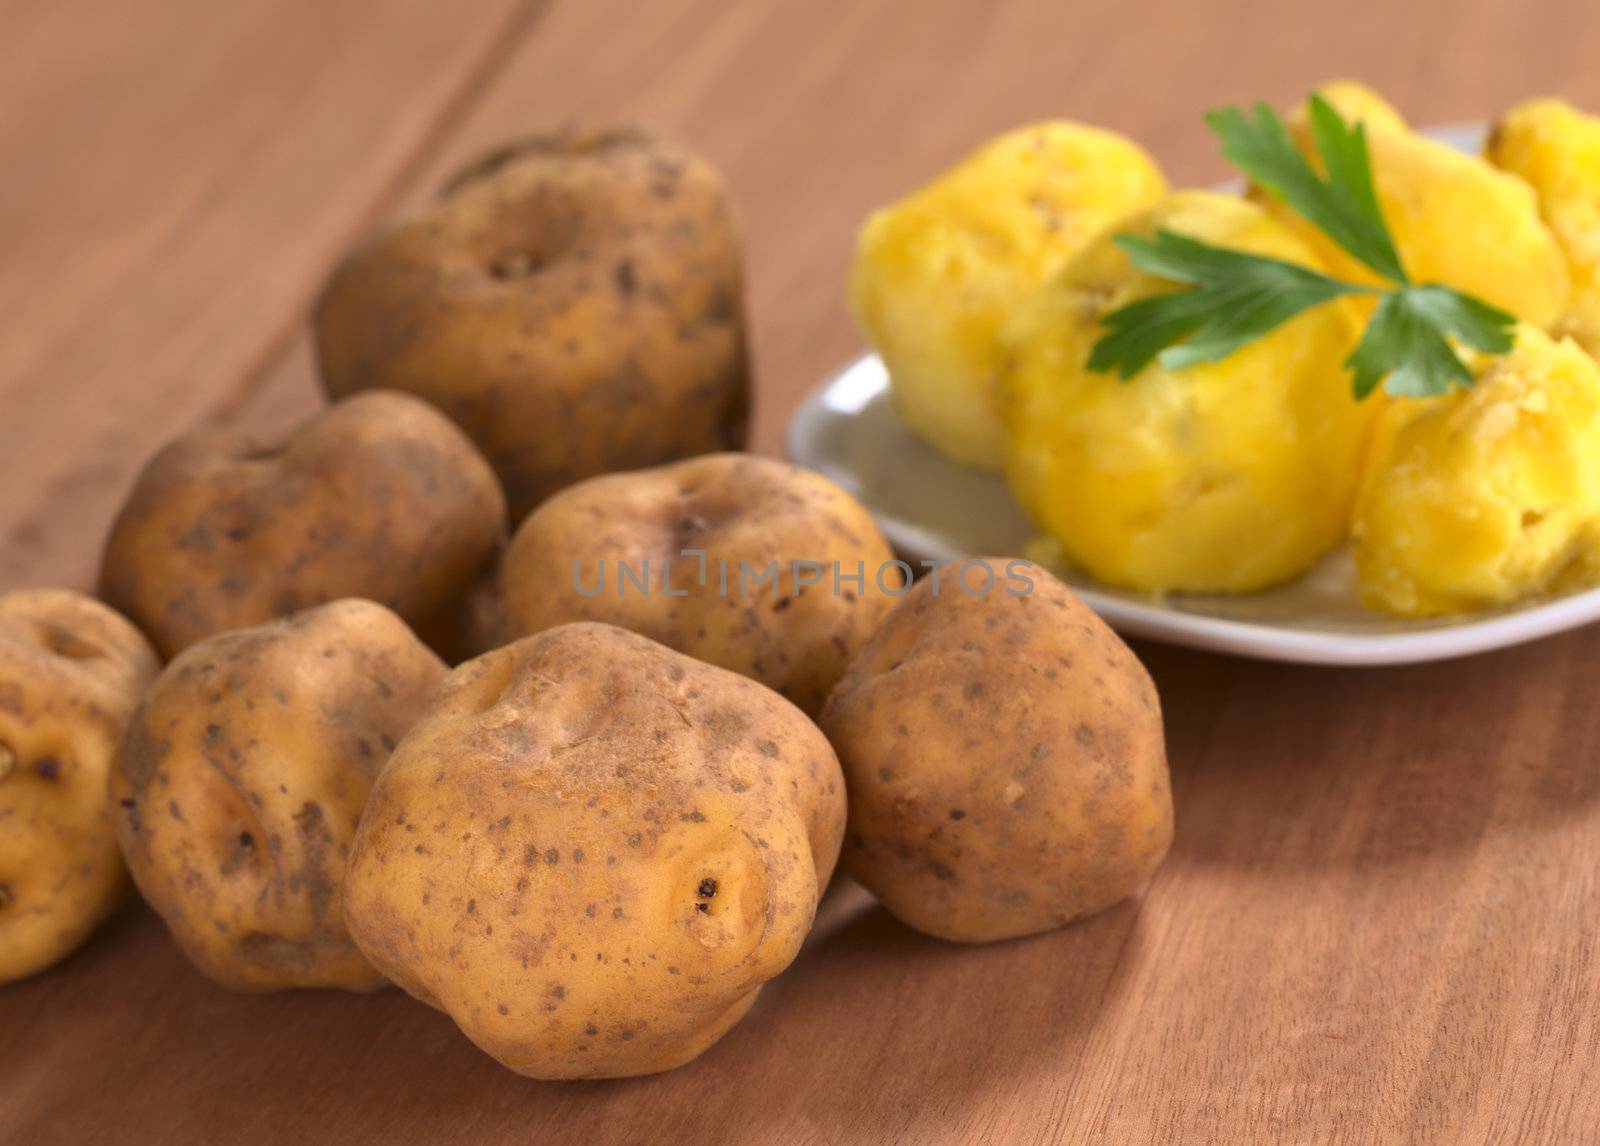 Peruvian yellow potato raw and cooked (Selective Focus, Focus on the first raw potato)